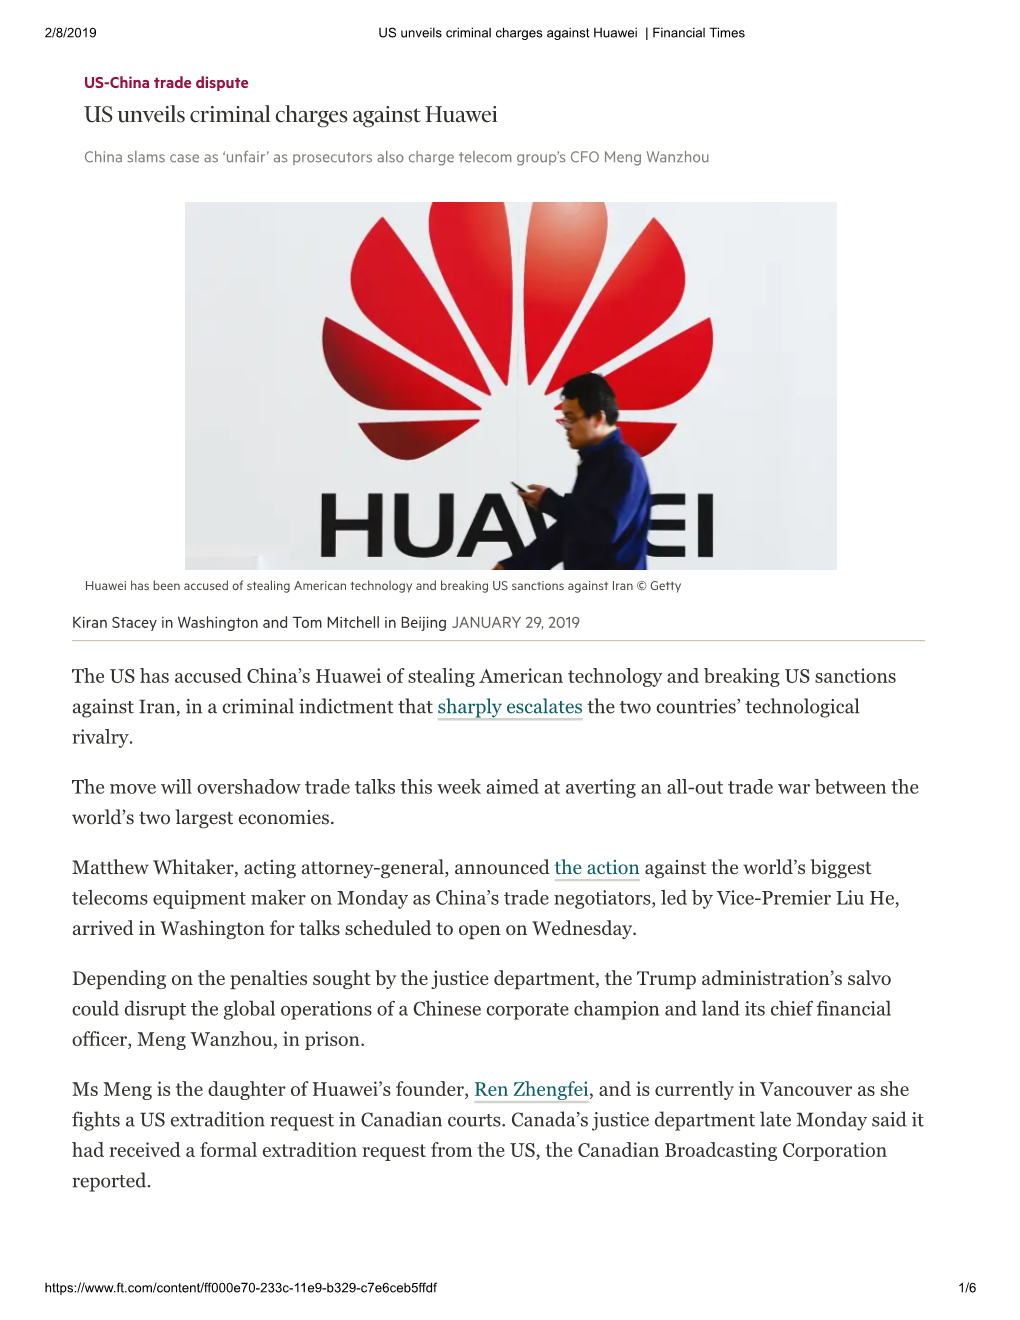 US Unveils Criminal Charges Against Huawei | Financial Times